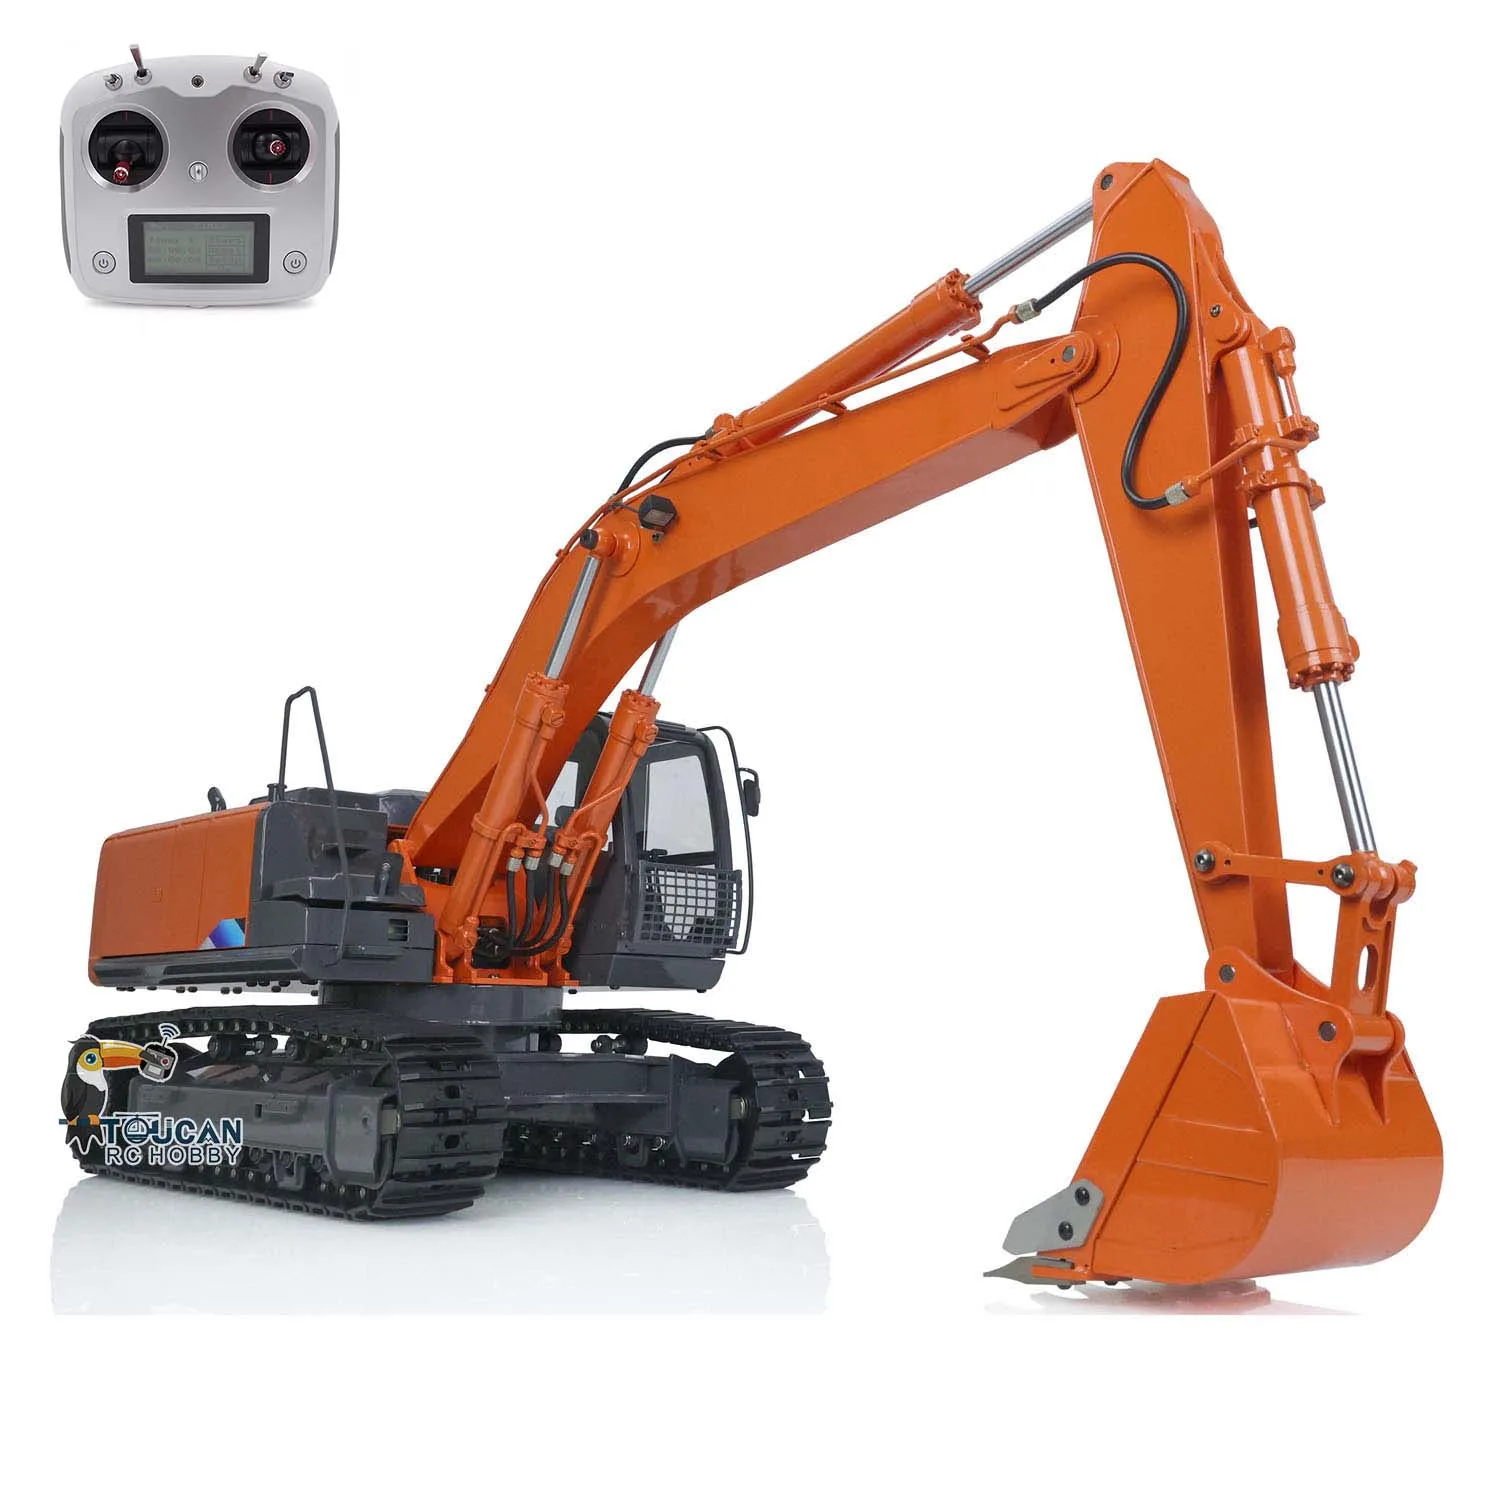 

1/12 Metal RC Hydraulic Excavator for DIM H2 ZX210 Radio Control Digger Assembled Painted Construction Car Model Toys TH21560